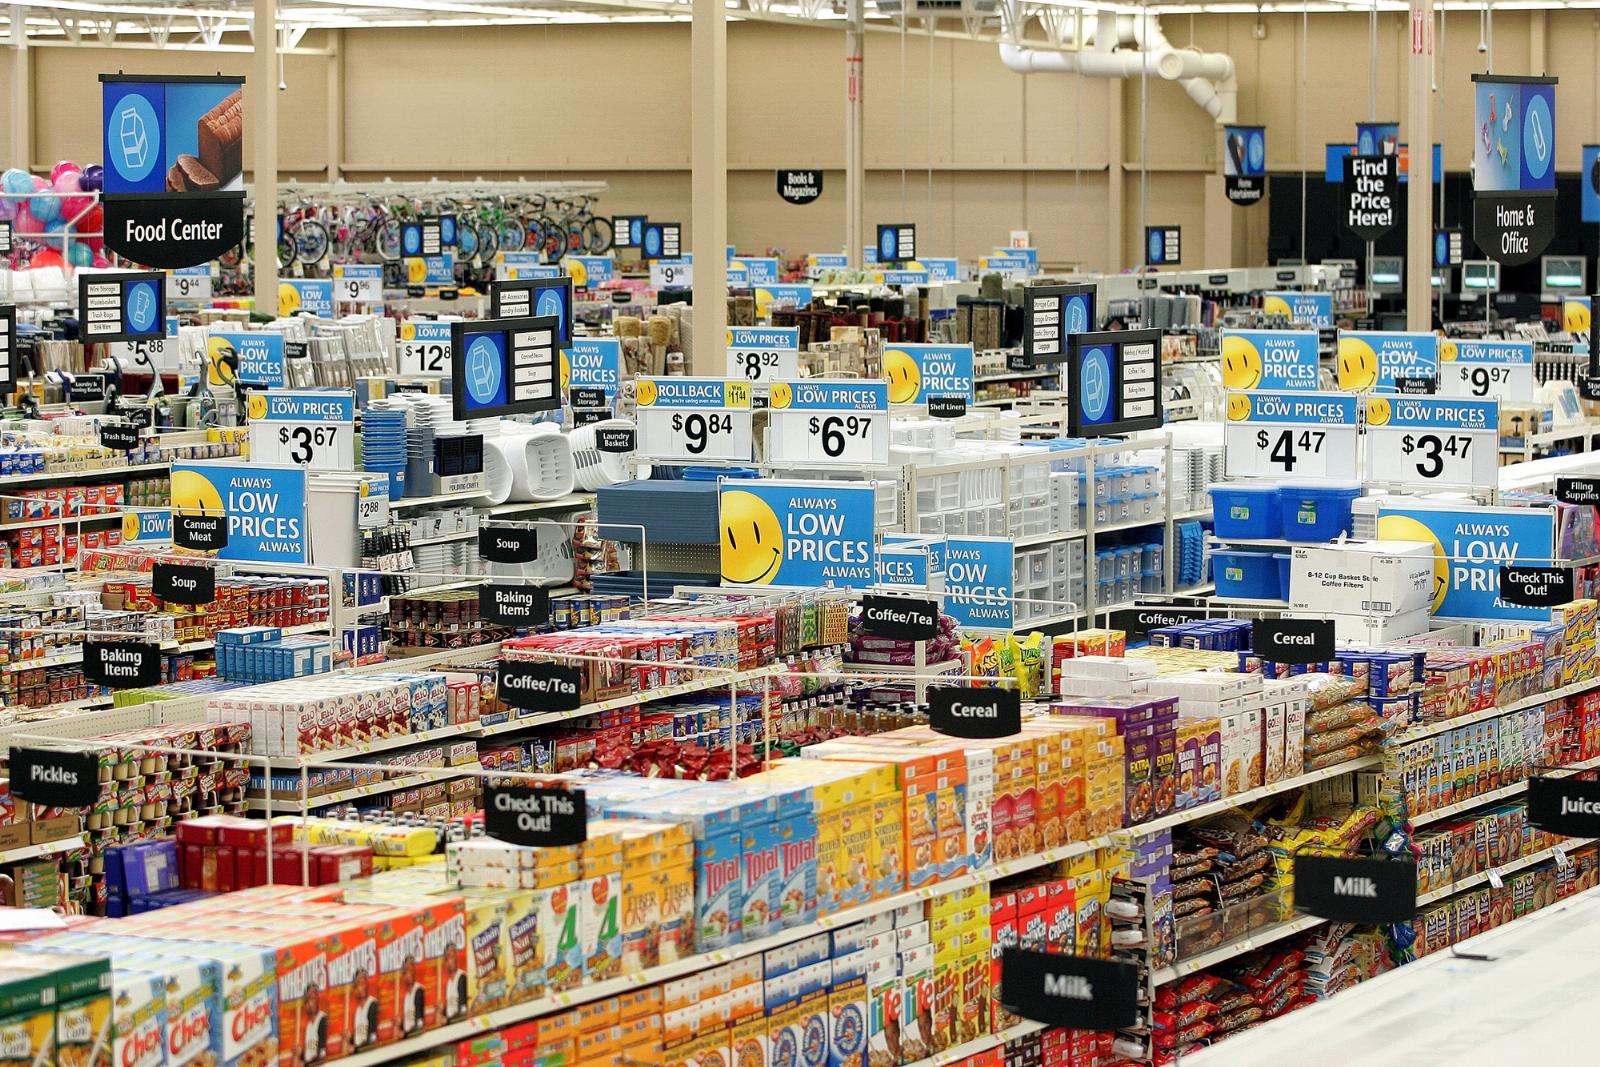 Google and OpenAI are Walmarts besieged by fruit stands